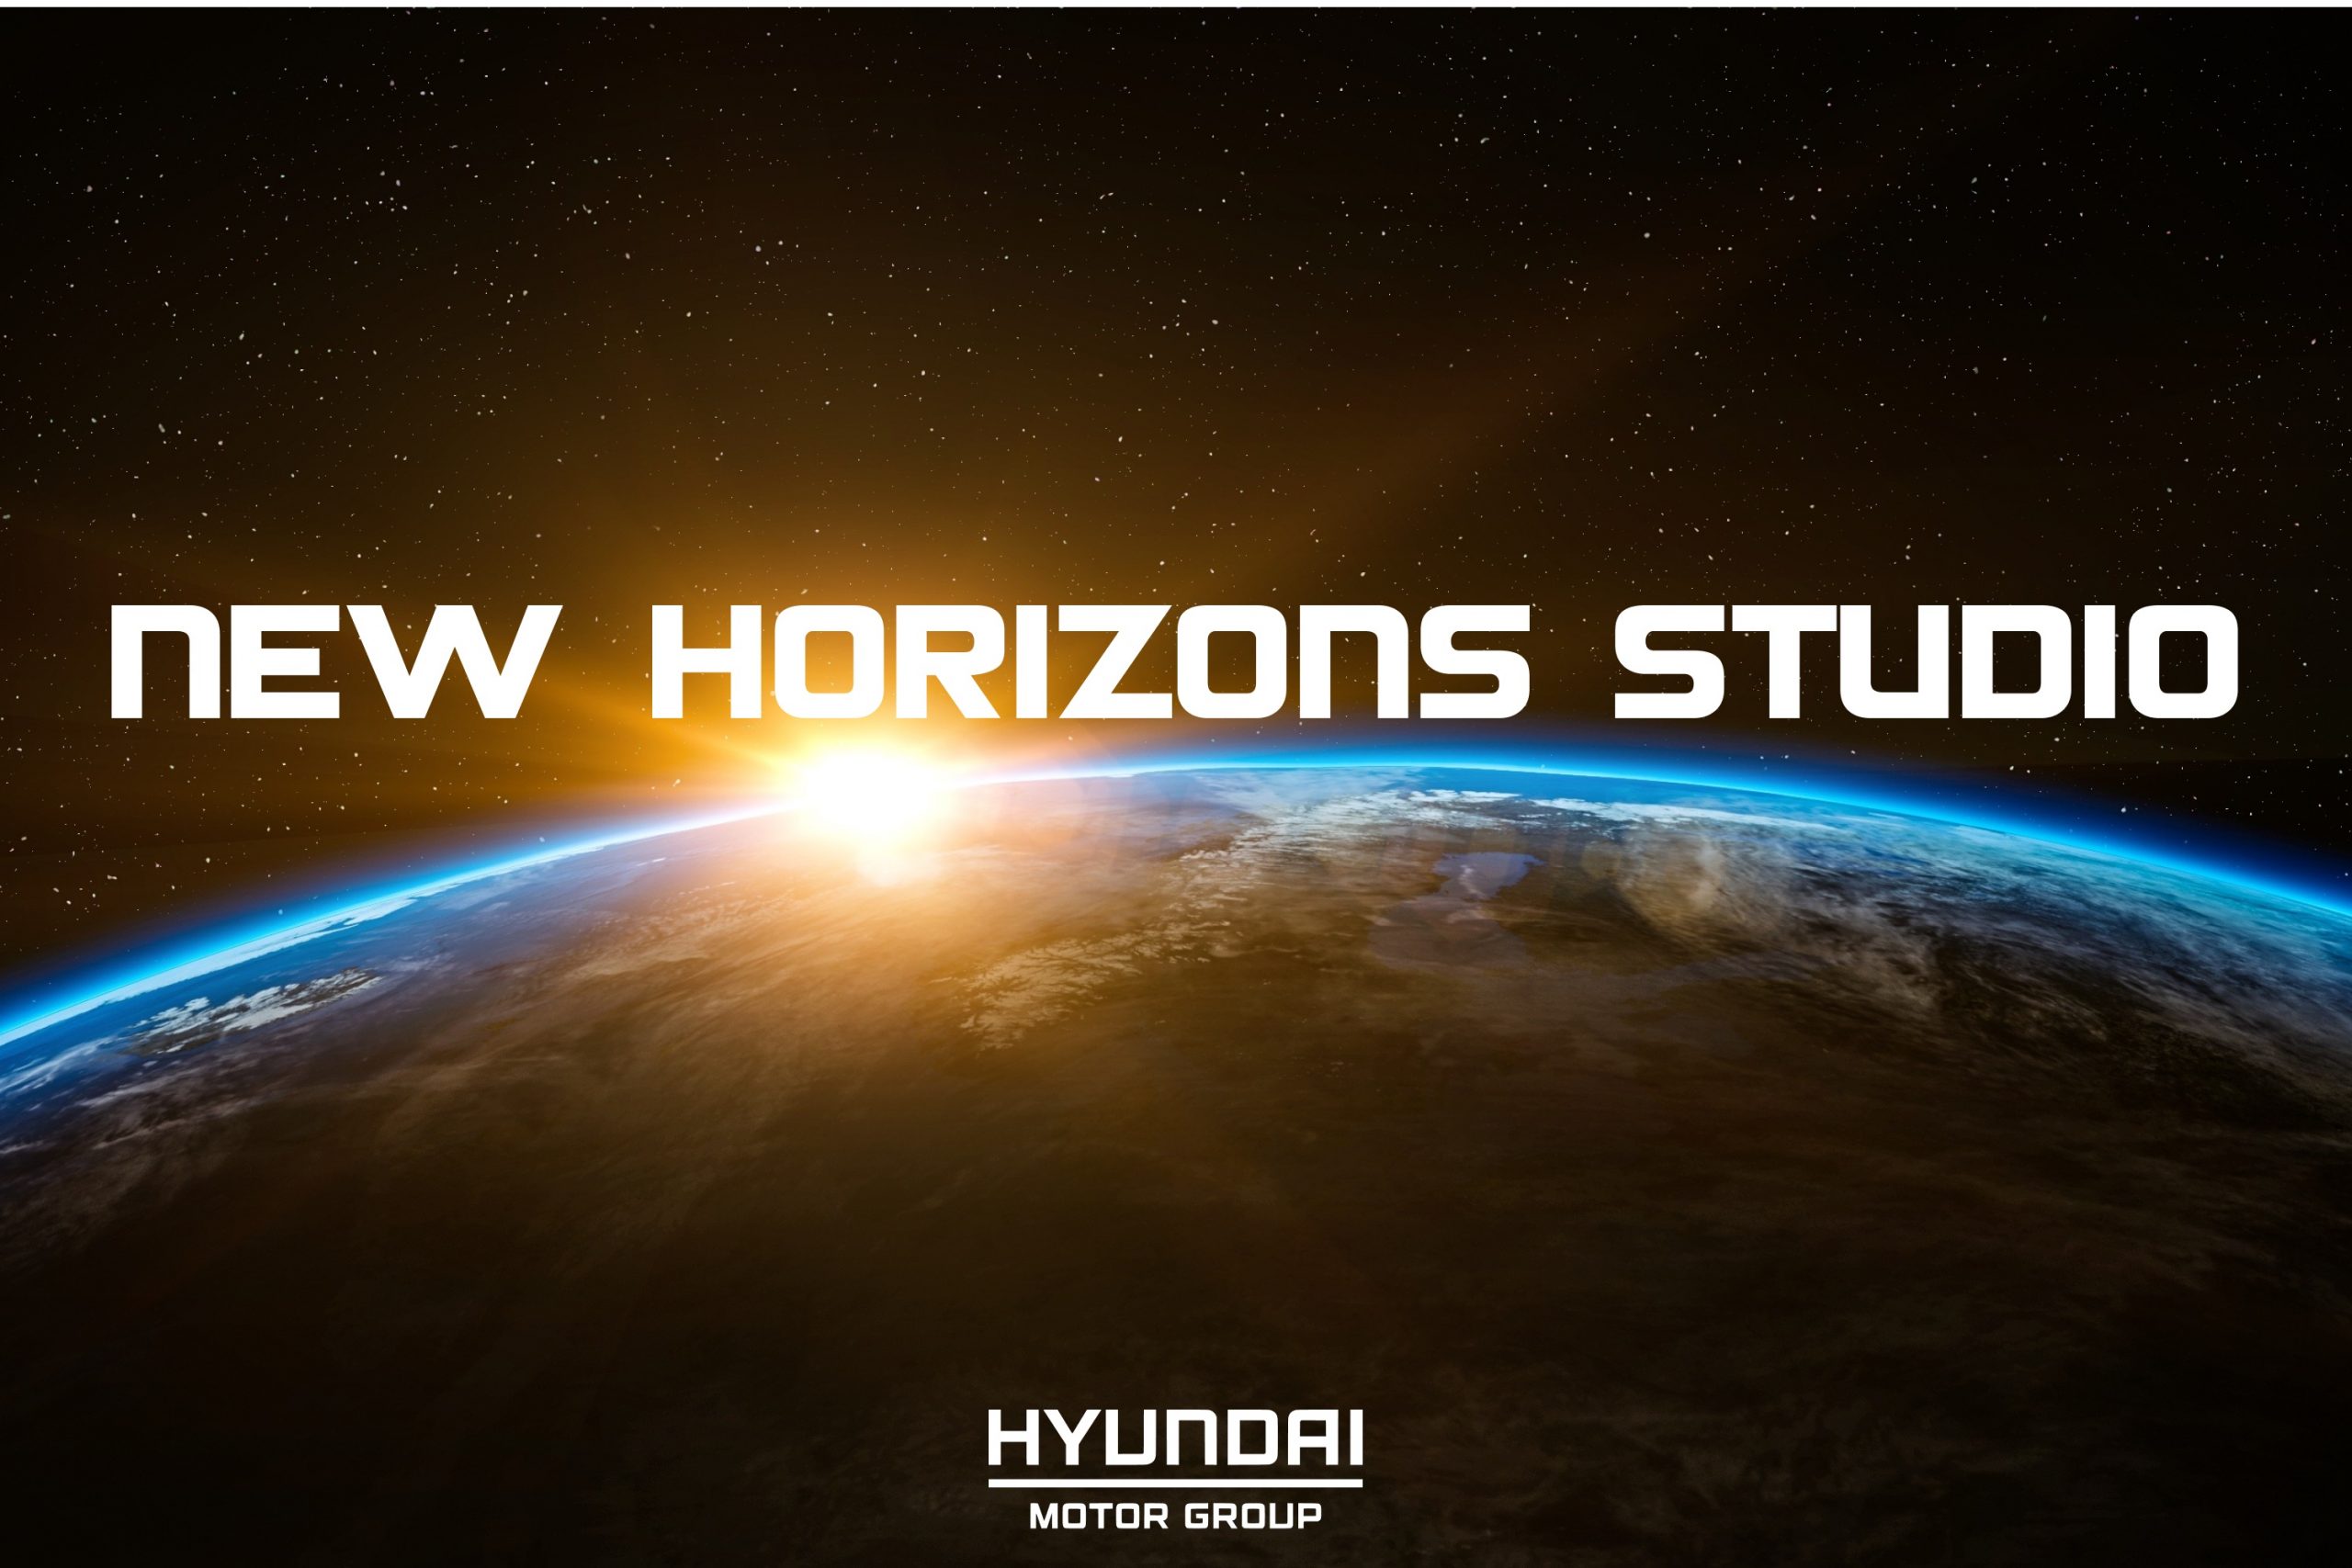 Image for Hyundai Motor Group Announces New Horizons Studio To Develop Ultimate Mobility Vehicles